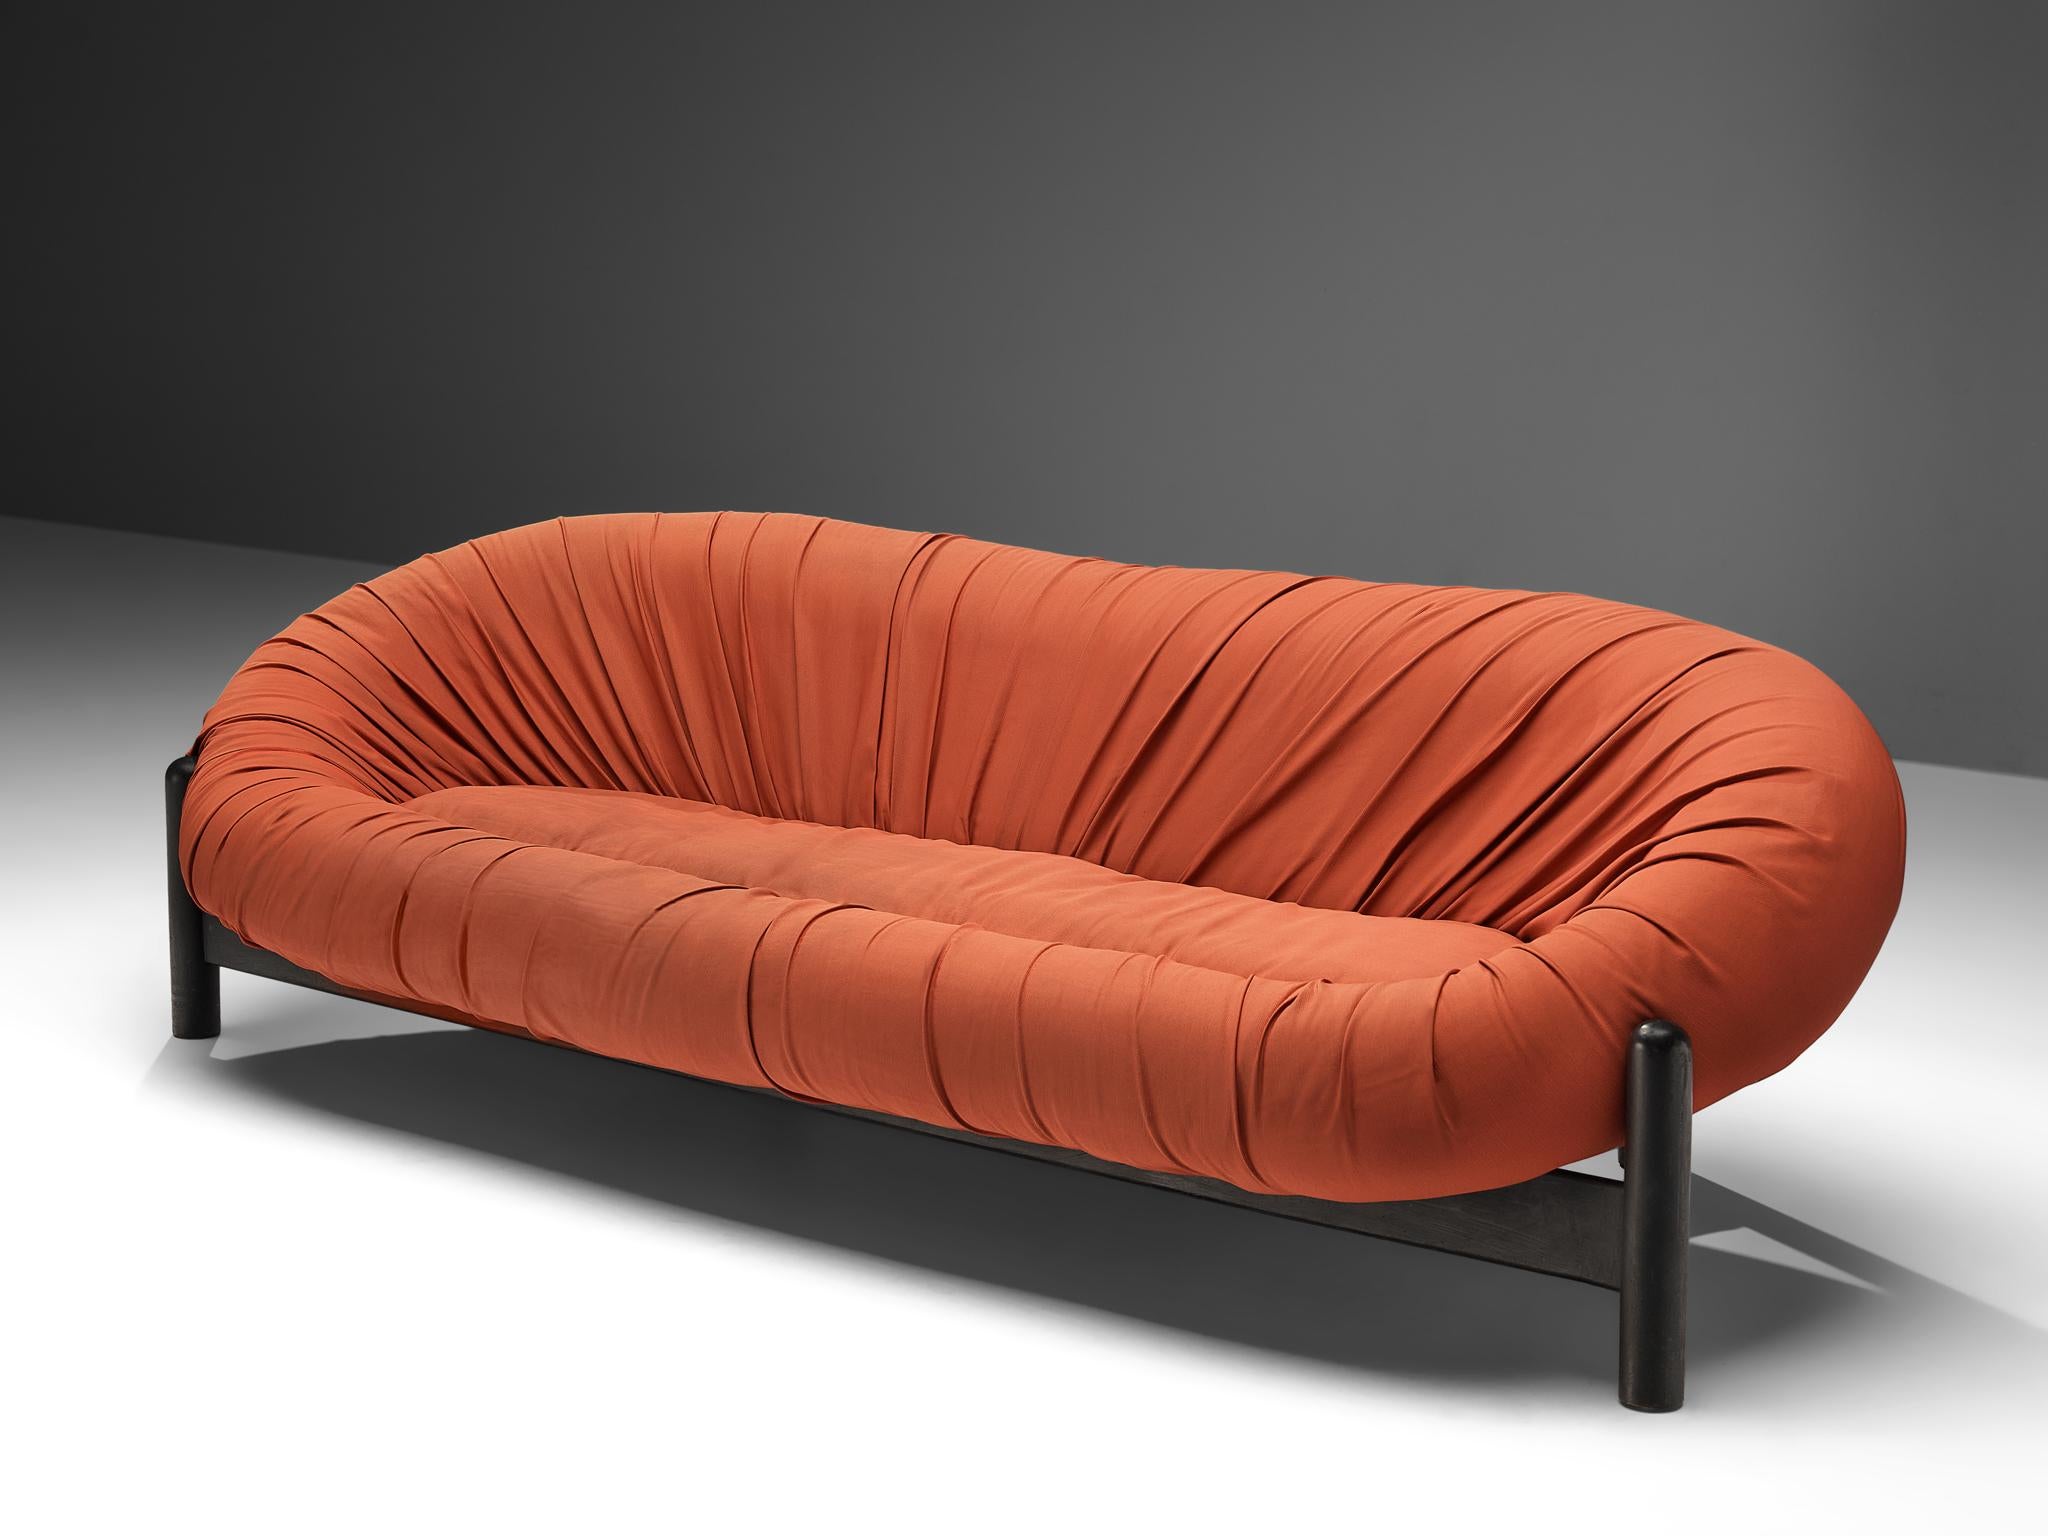 Sofa, lacquered wood, fabric, Brazil, 1970s 

This bulky Brazilian sofa consist of a round shell that forms an oval ring around the seat. The red fabric is tufted around the shell in dynamic folds. The shape invites to take a seat and relax. The